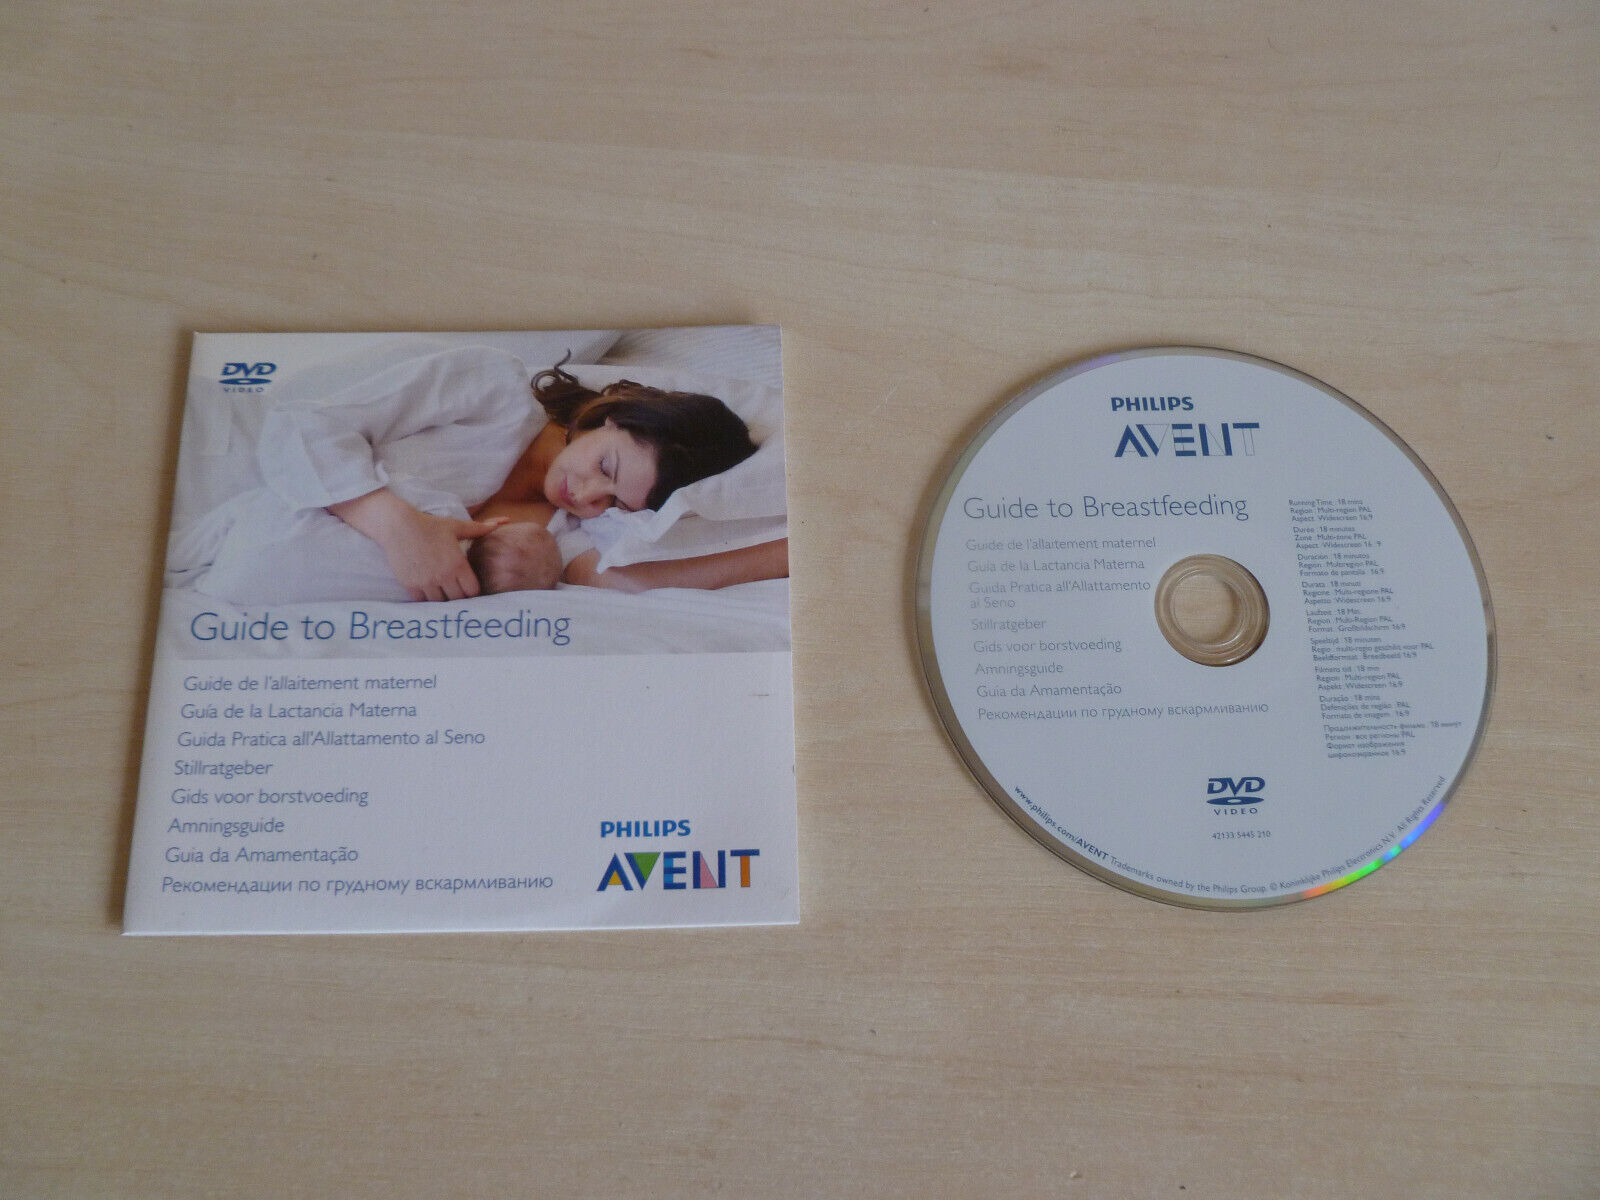 39 x Philips Avent Guild To Breast Feeding DVD - New